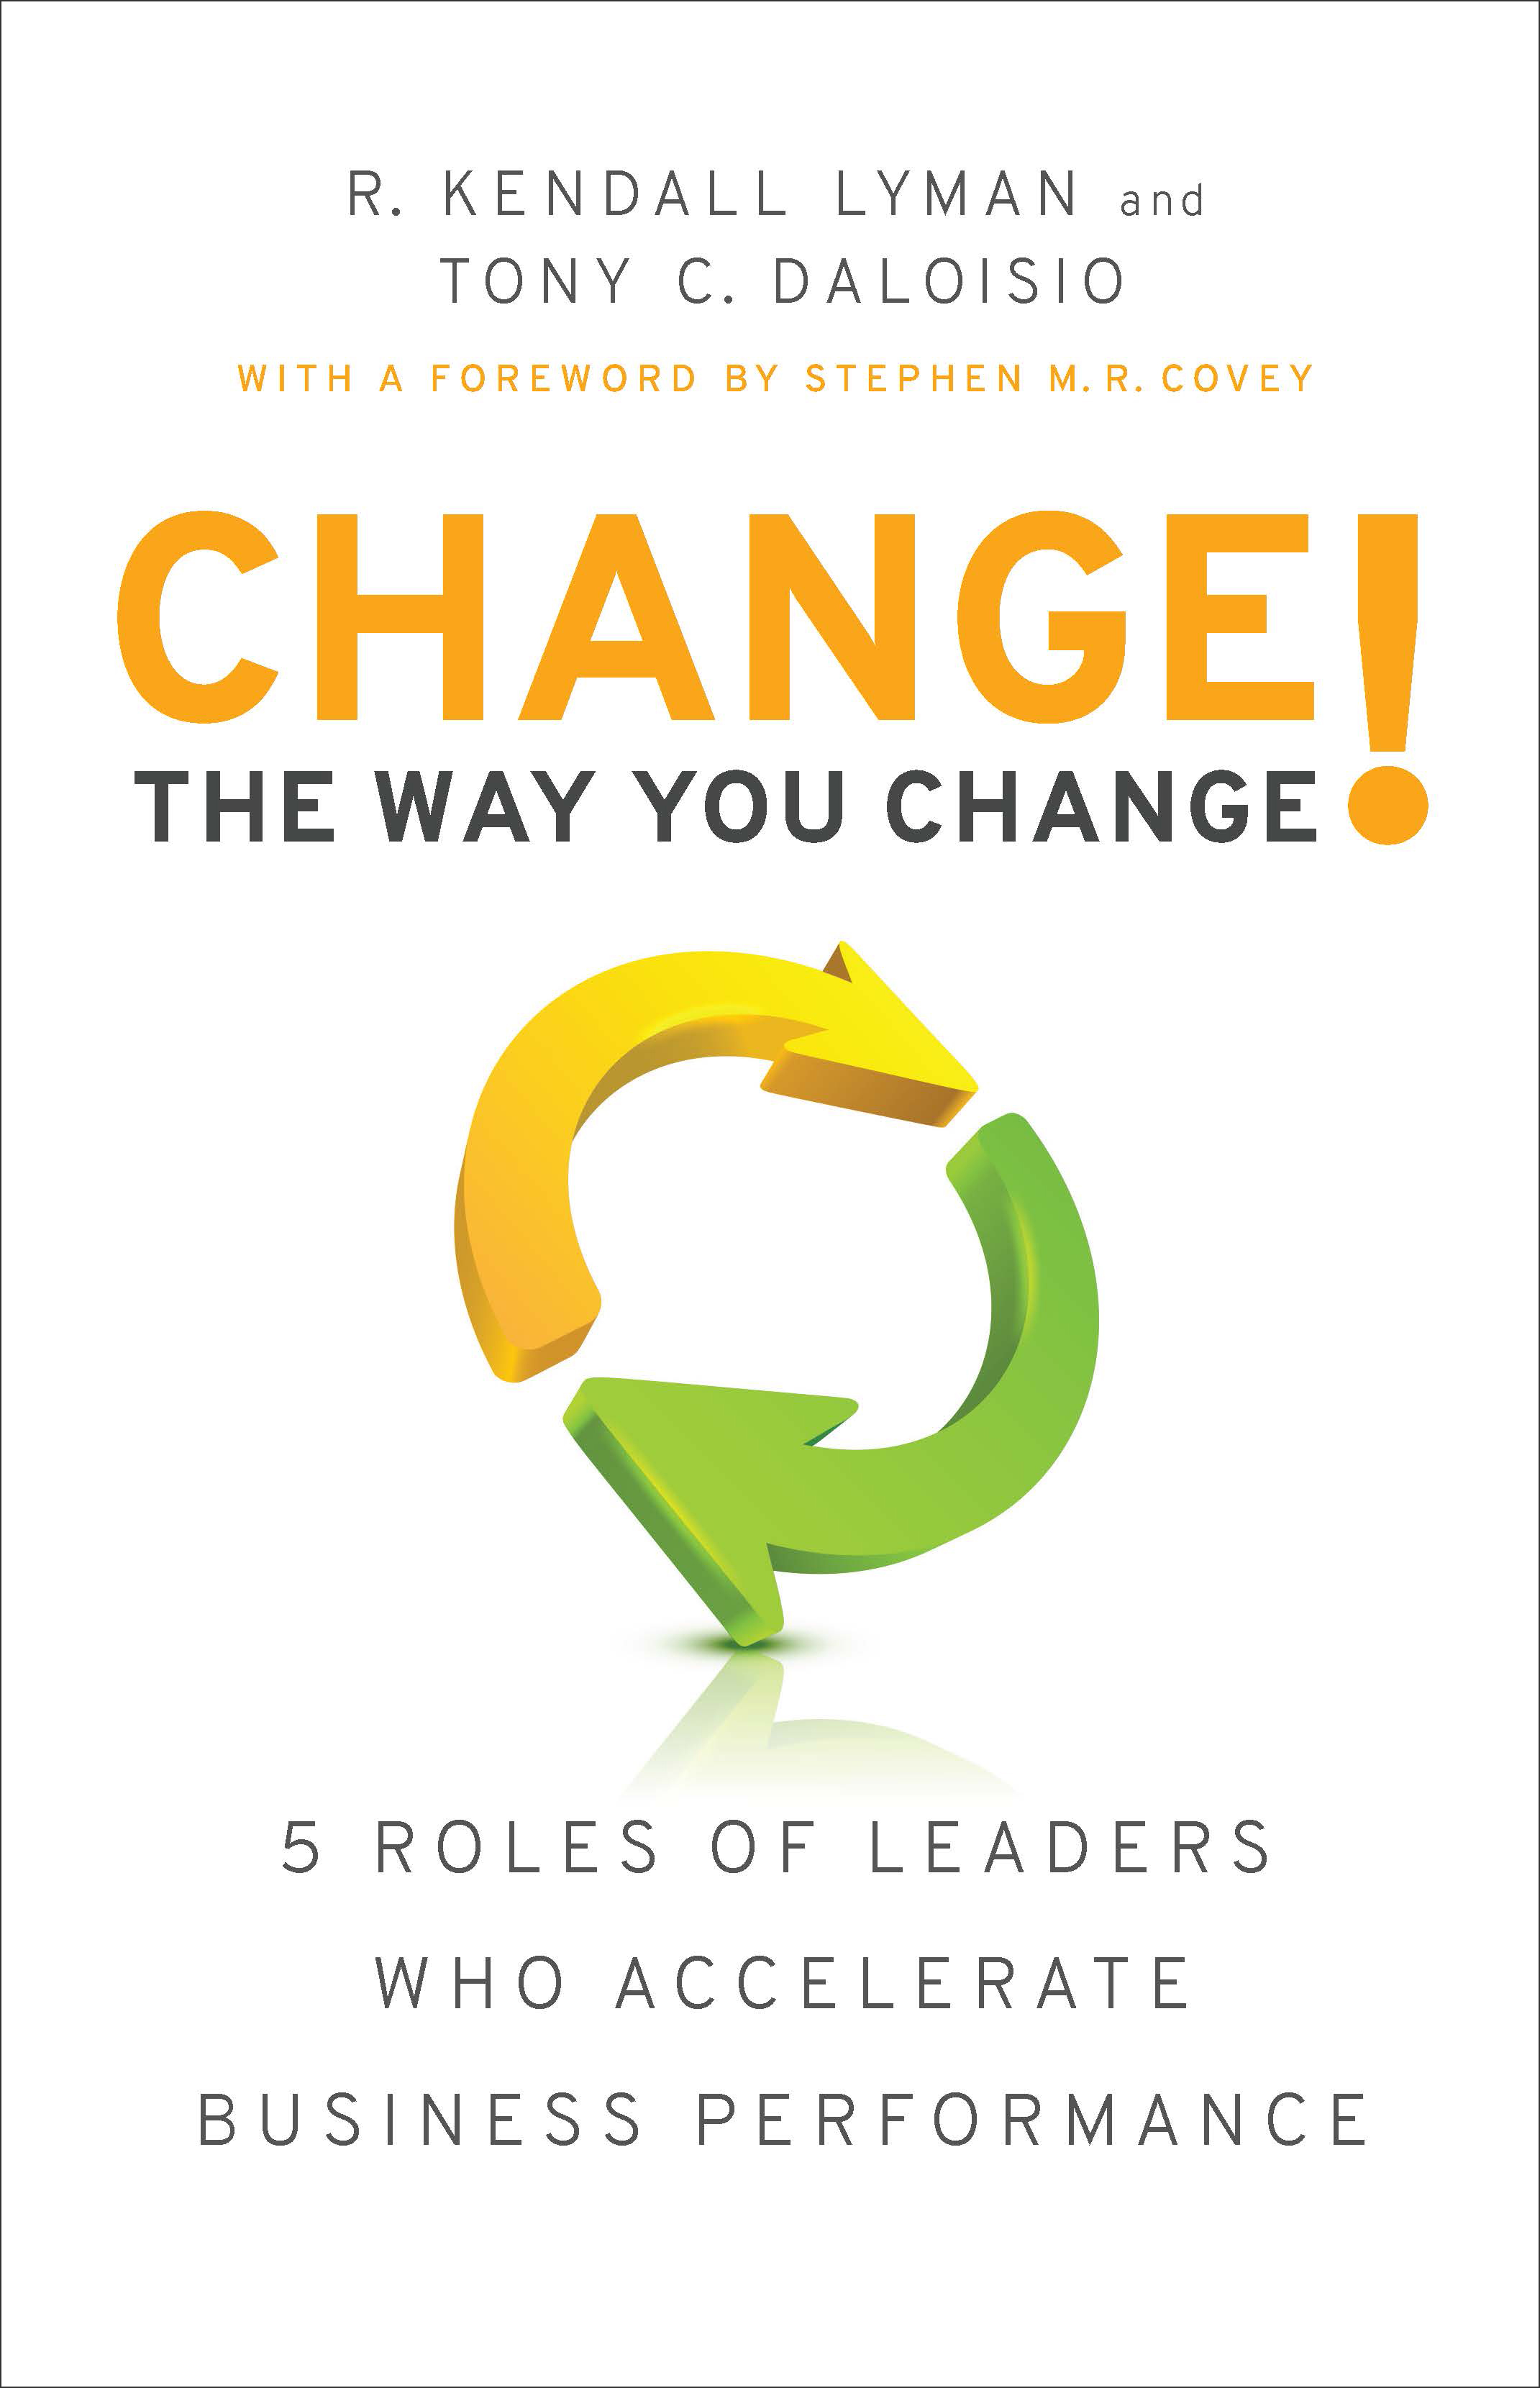 Change the Way You Change! 5 Roles of Leaders Who Accelerate Business Performance